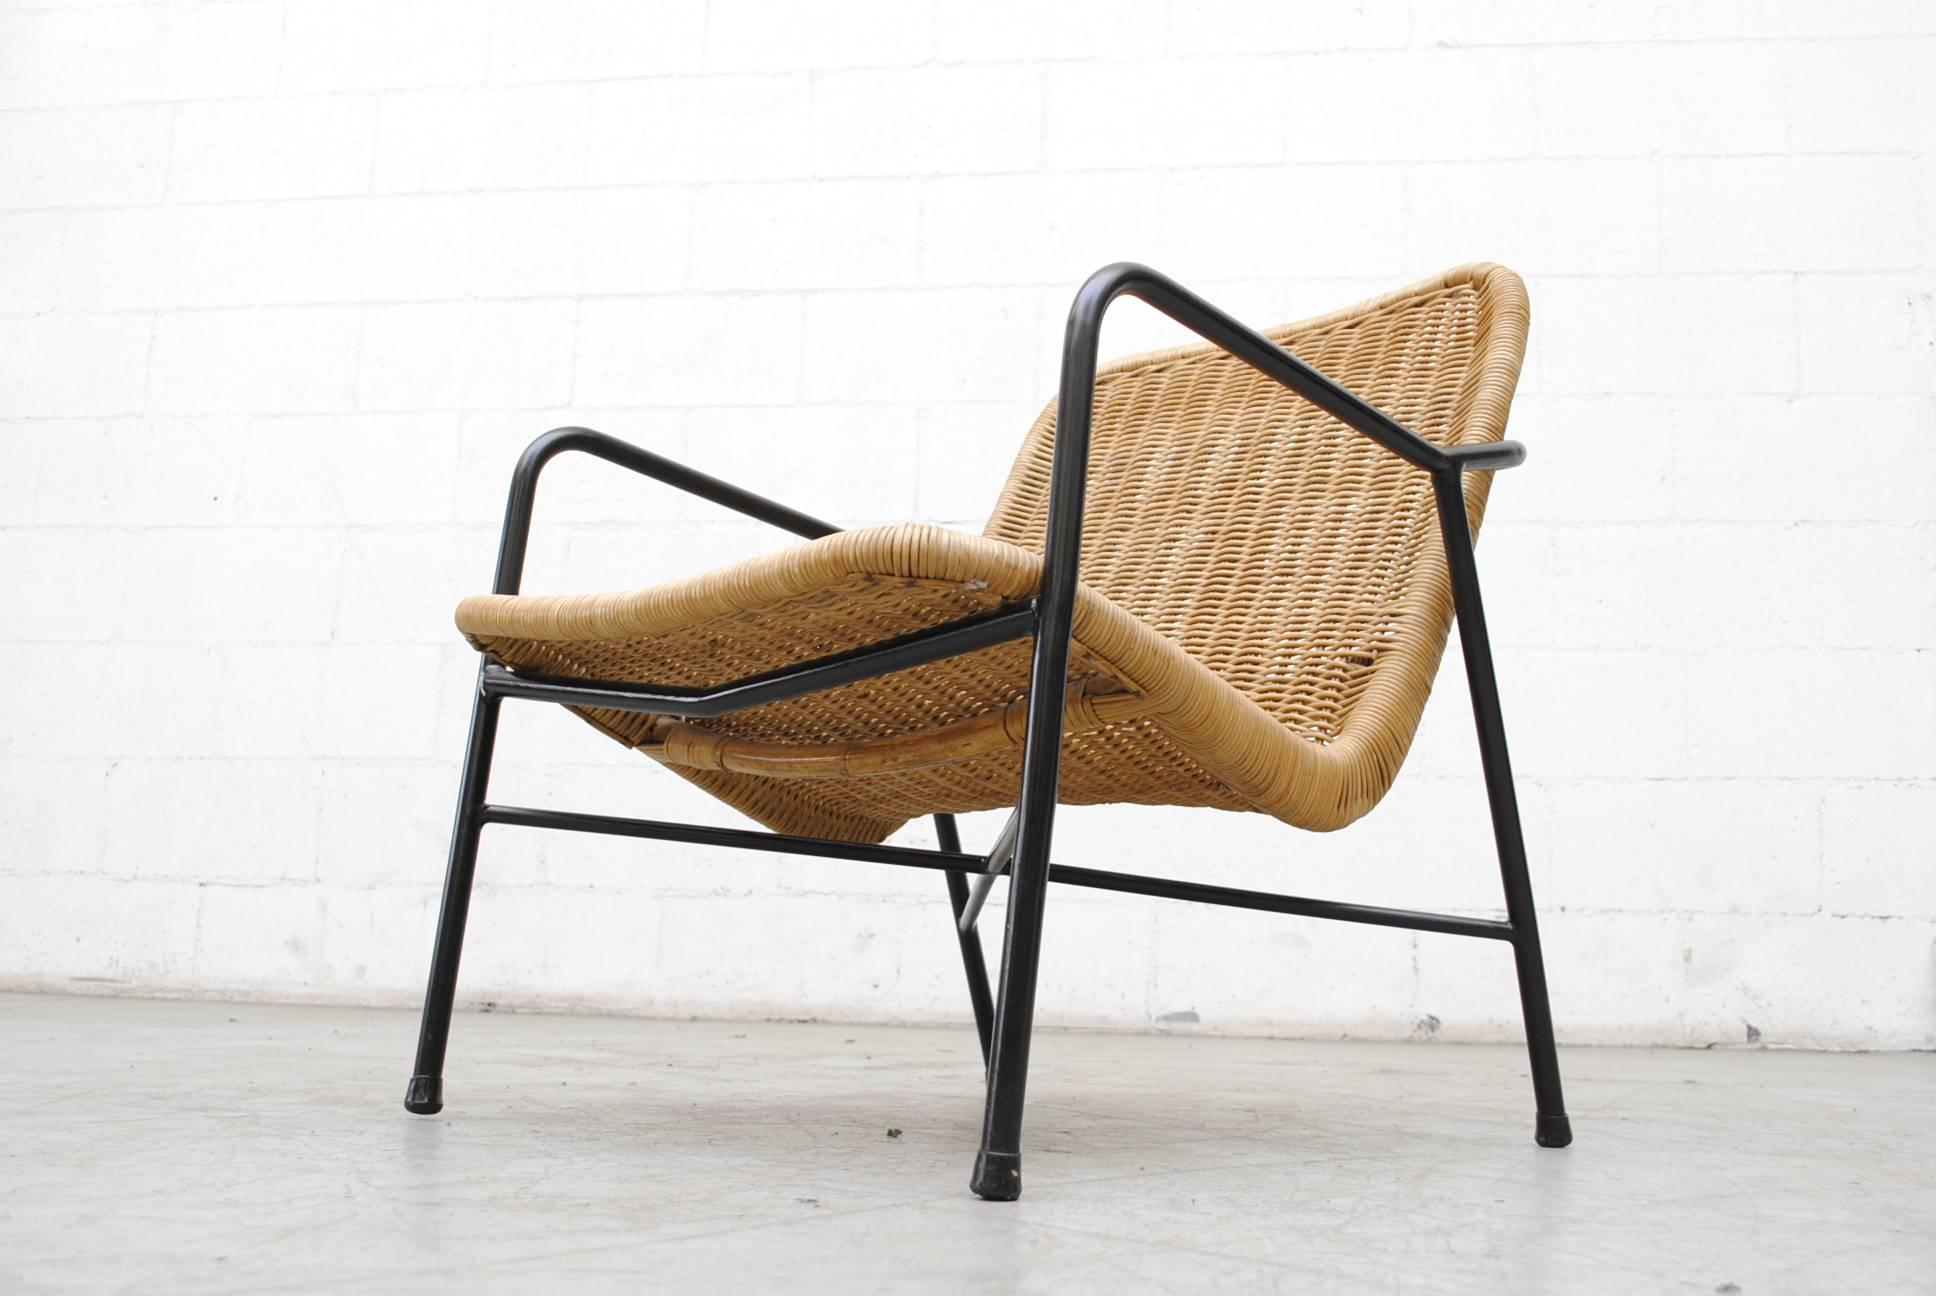 Woven rattan seat on original black enameled metal frame with new leather buckle strap which holds seat to frame, tightening adjusts the seat pitch. Seat and frame in good original condition with wear consistent with its age and usage.